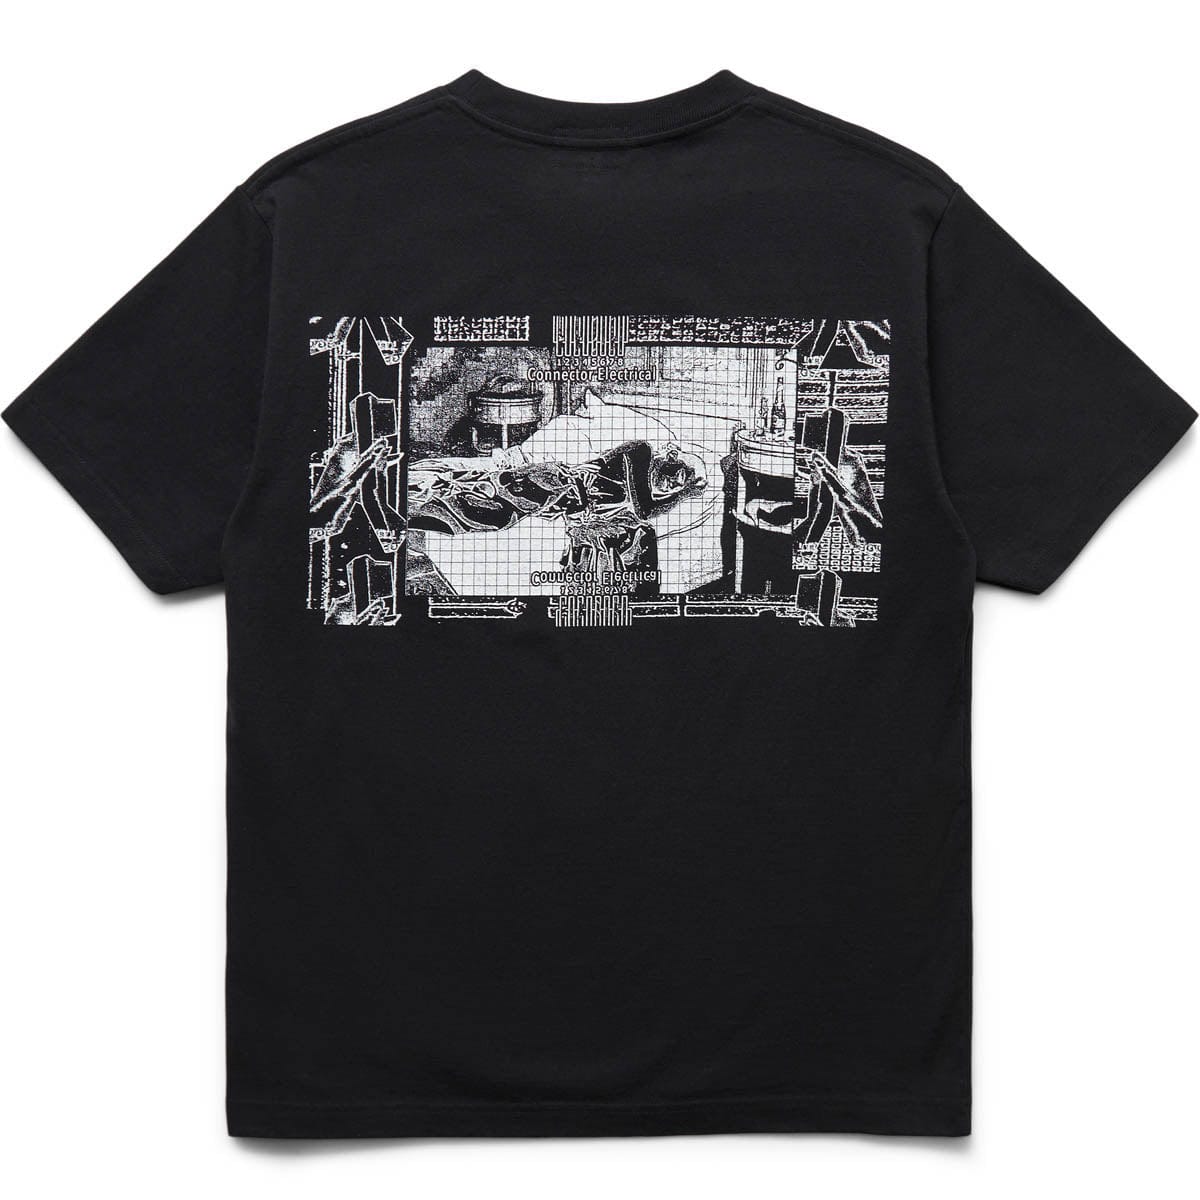 Cav Empt T-Shirts CONNECTOR ELECTRICAL T